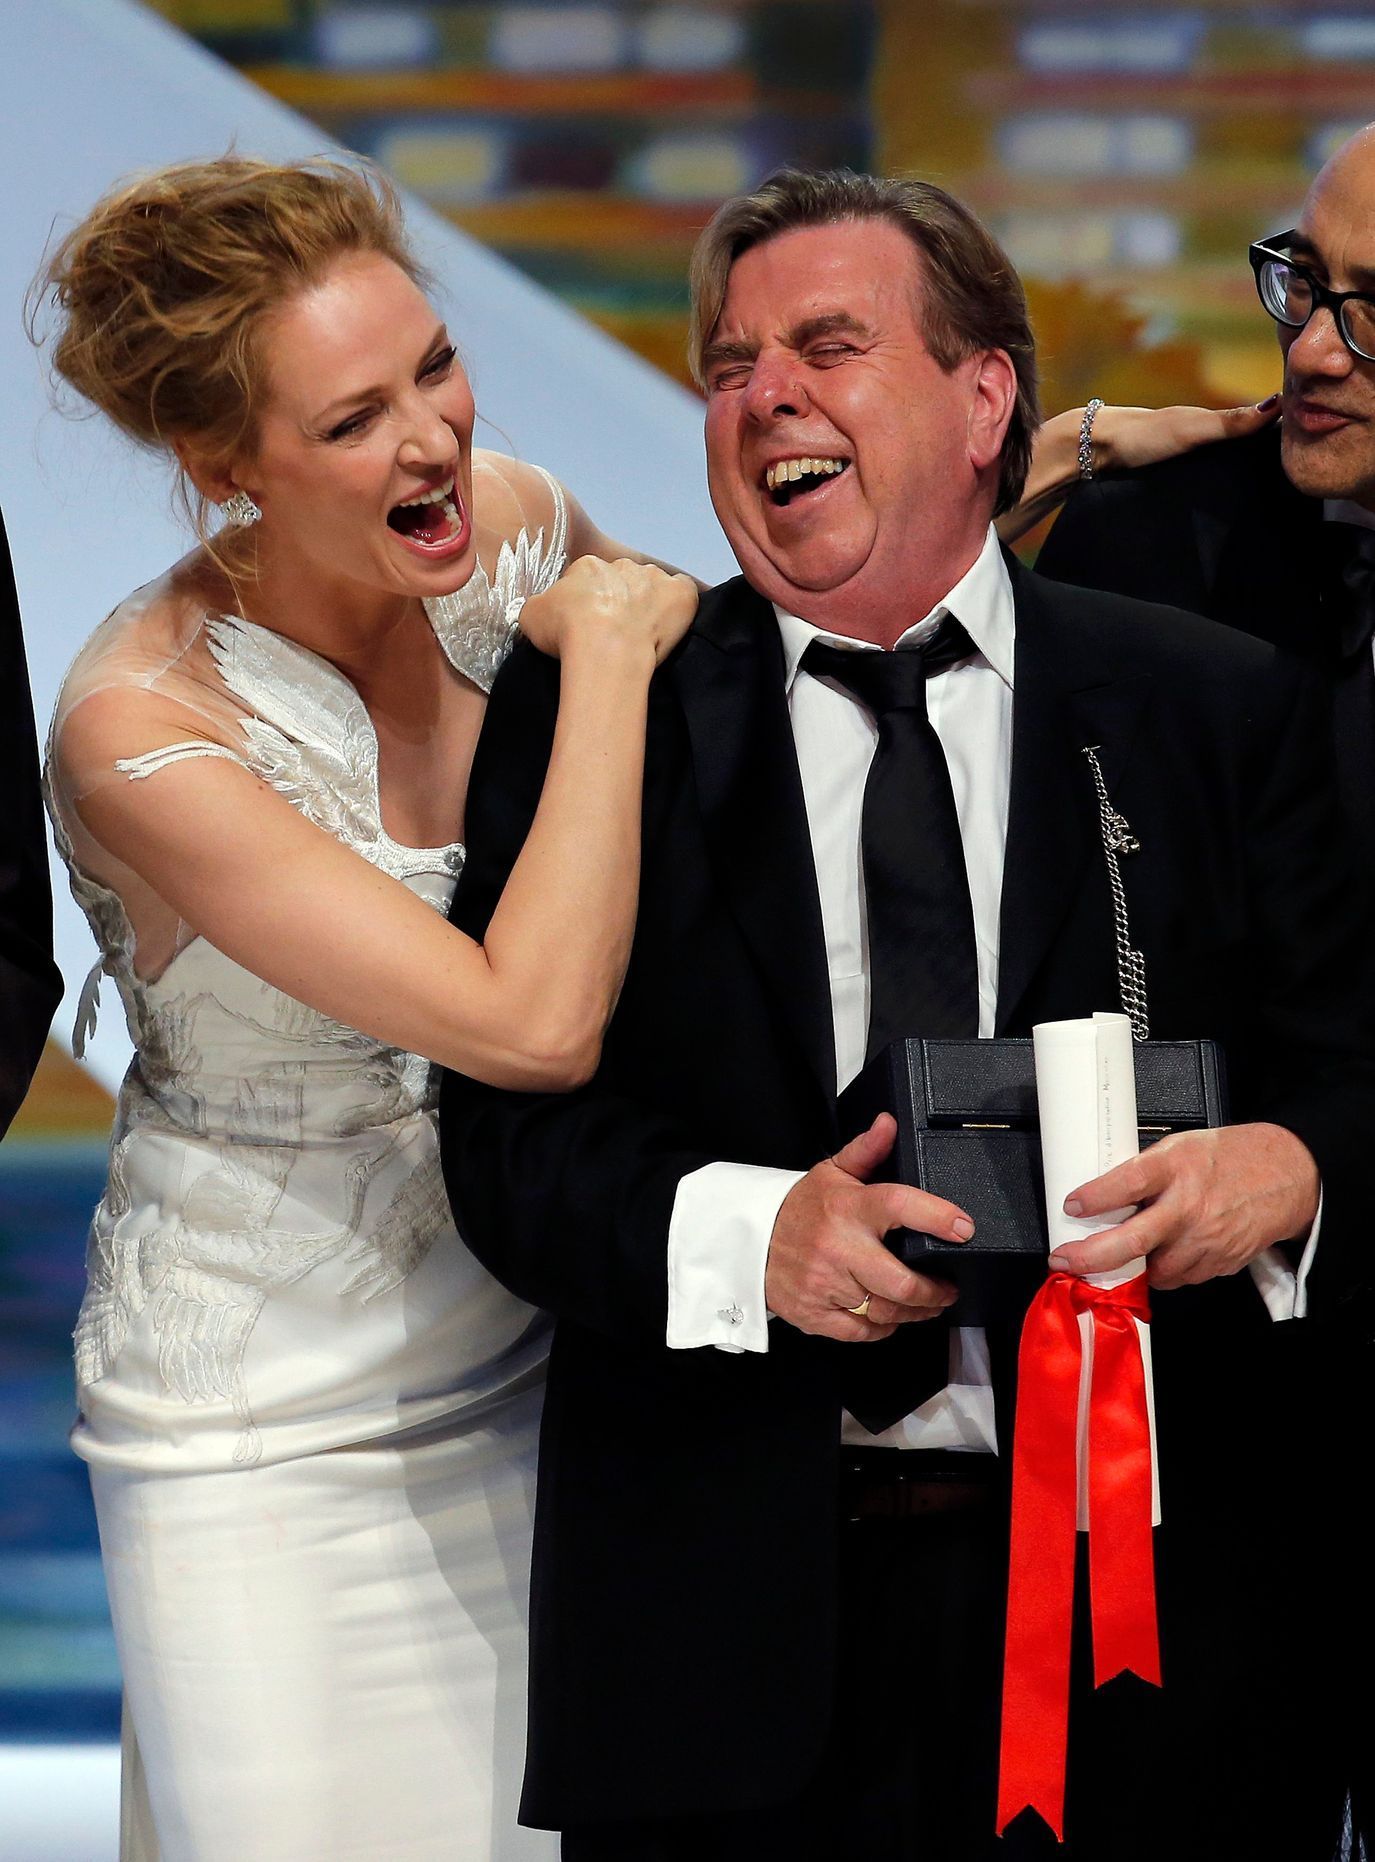 Actress Uma Thurman and actor Timothy Spall, Best Actor award winner for his role in the film &quot;Mr. Turner&quot;, pose on stage during the closing ceremony of the 67th Cannes Film Festival in Cann